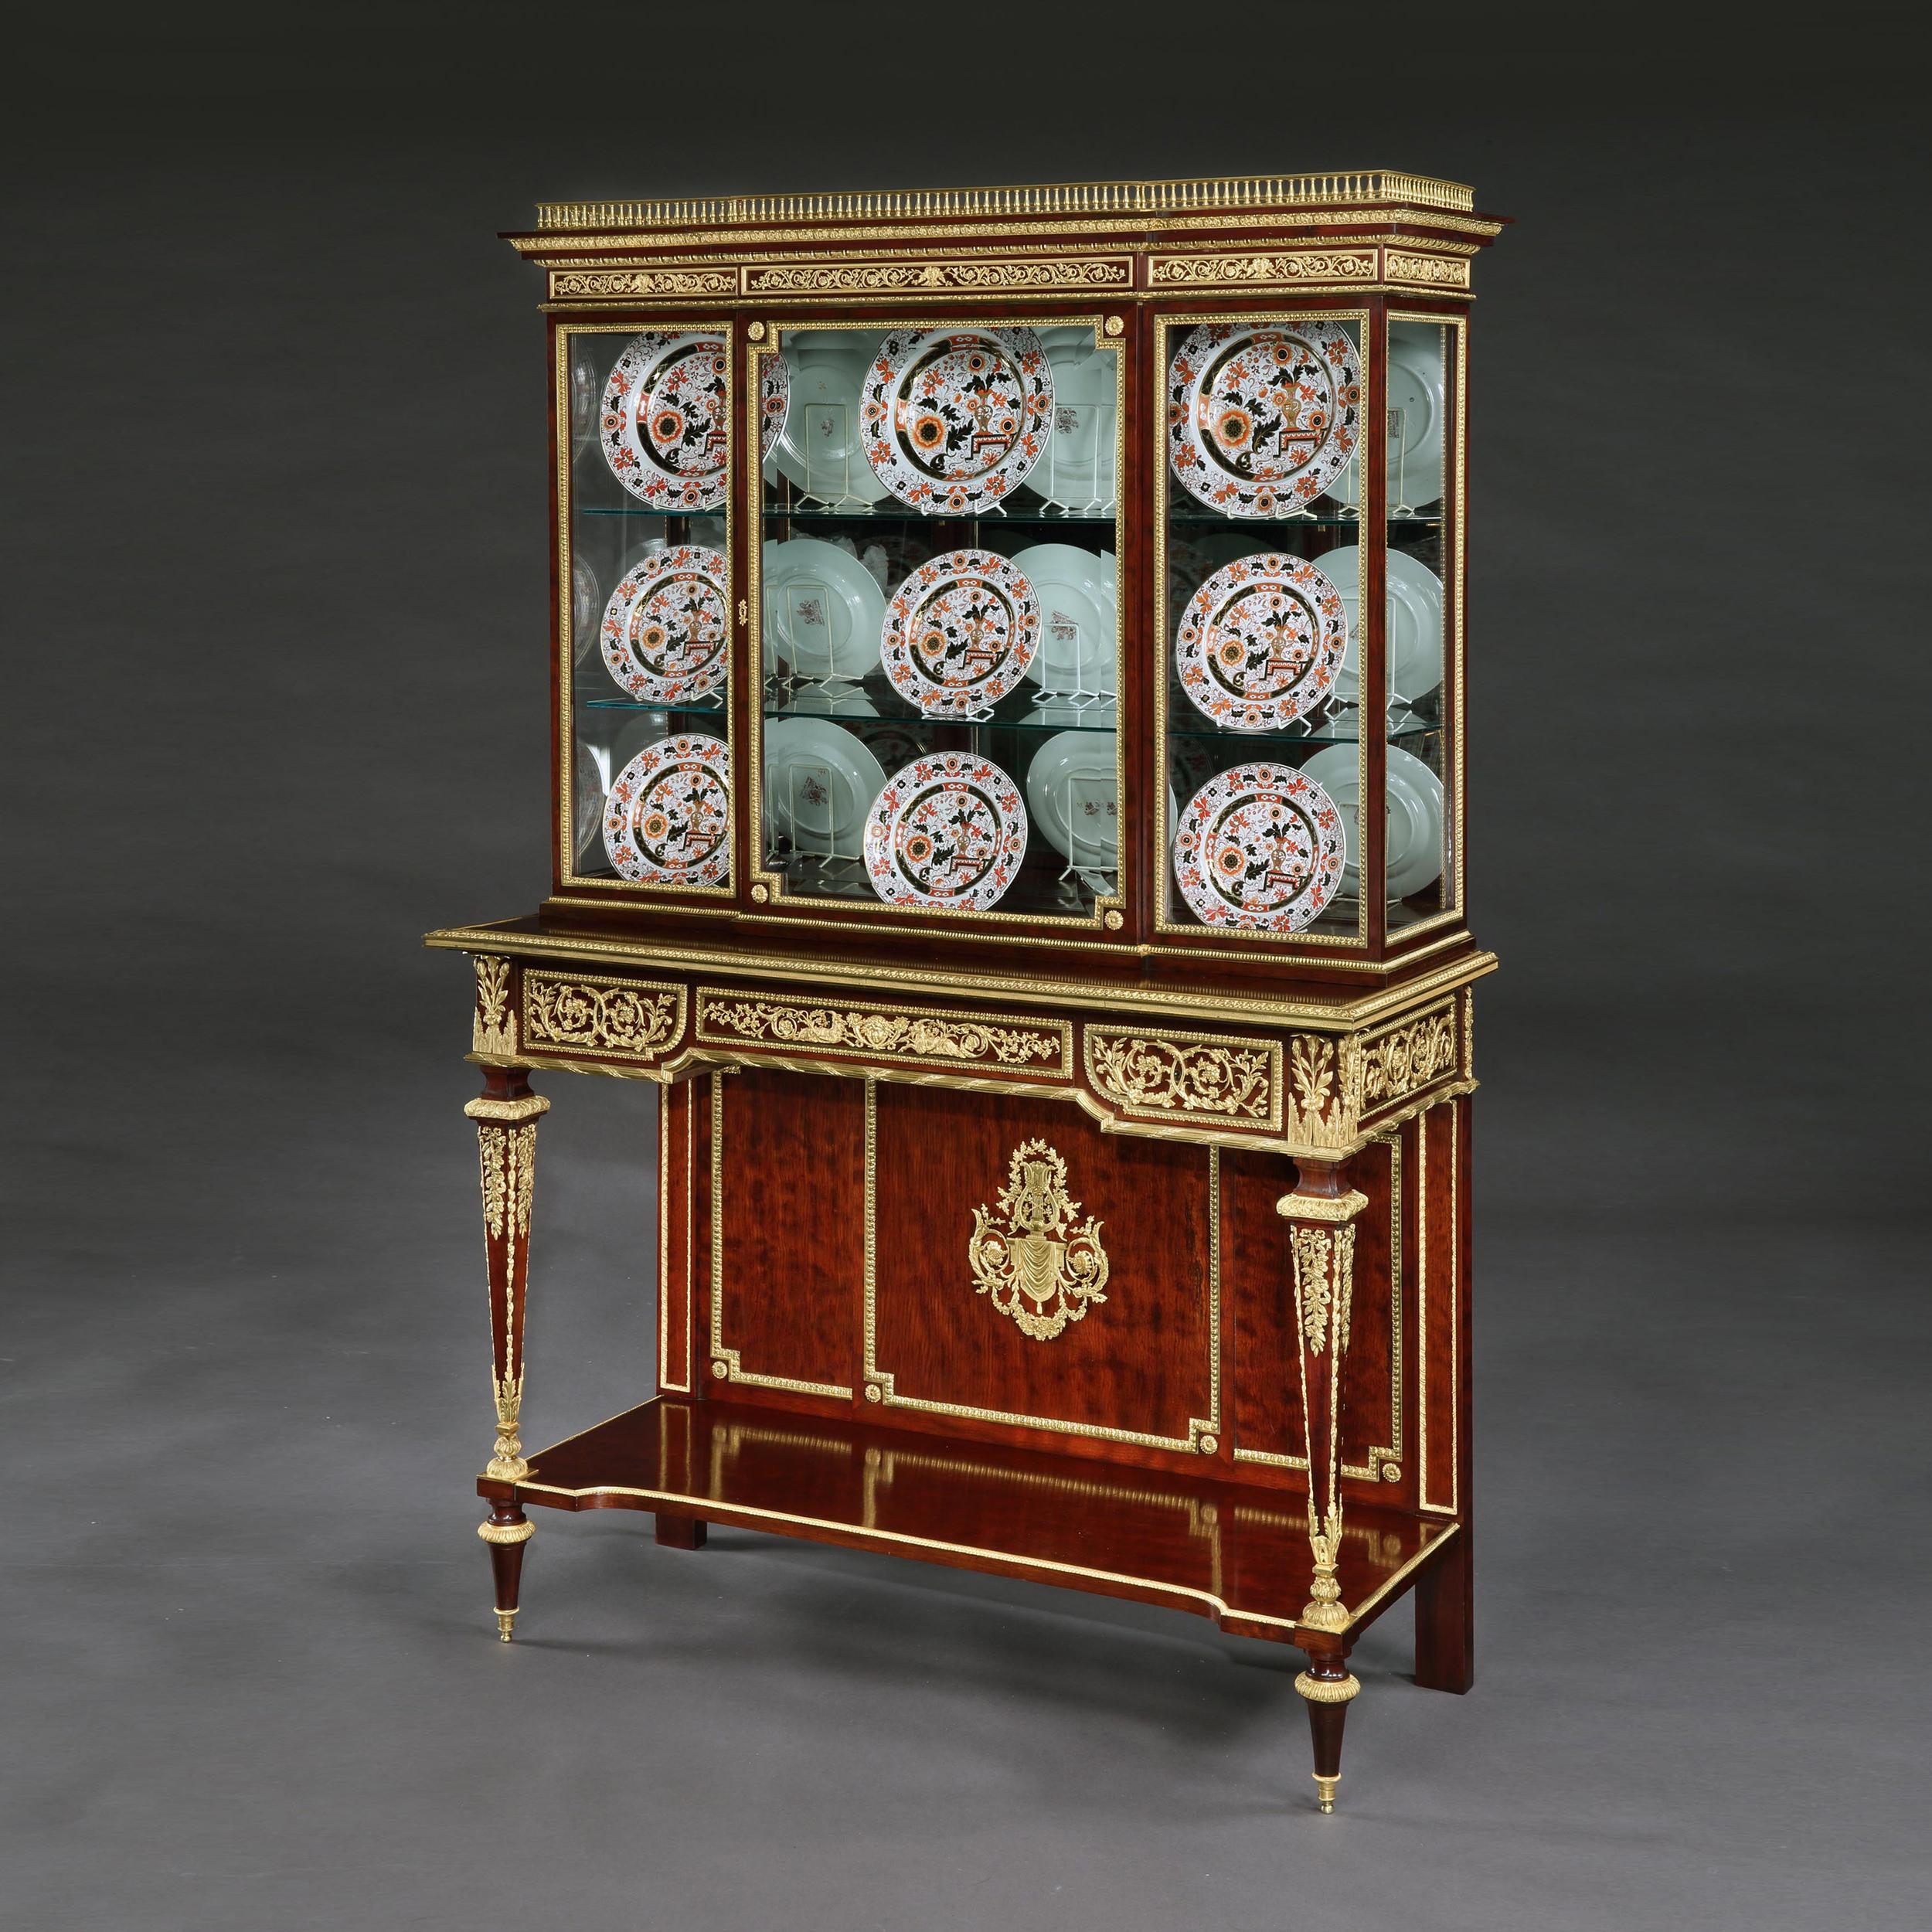 French Pair of 19th Century Ormolu-Mounted Mahogany Display Cabinets by Henri Picard For Sale